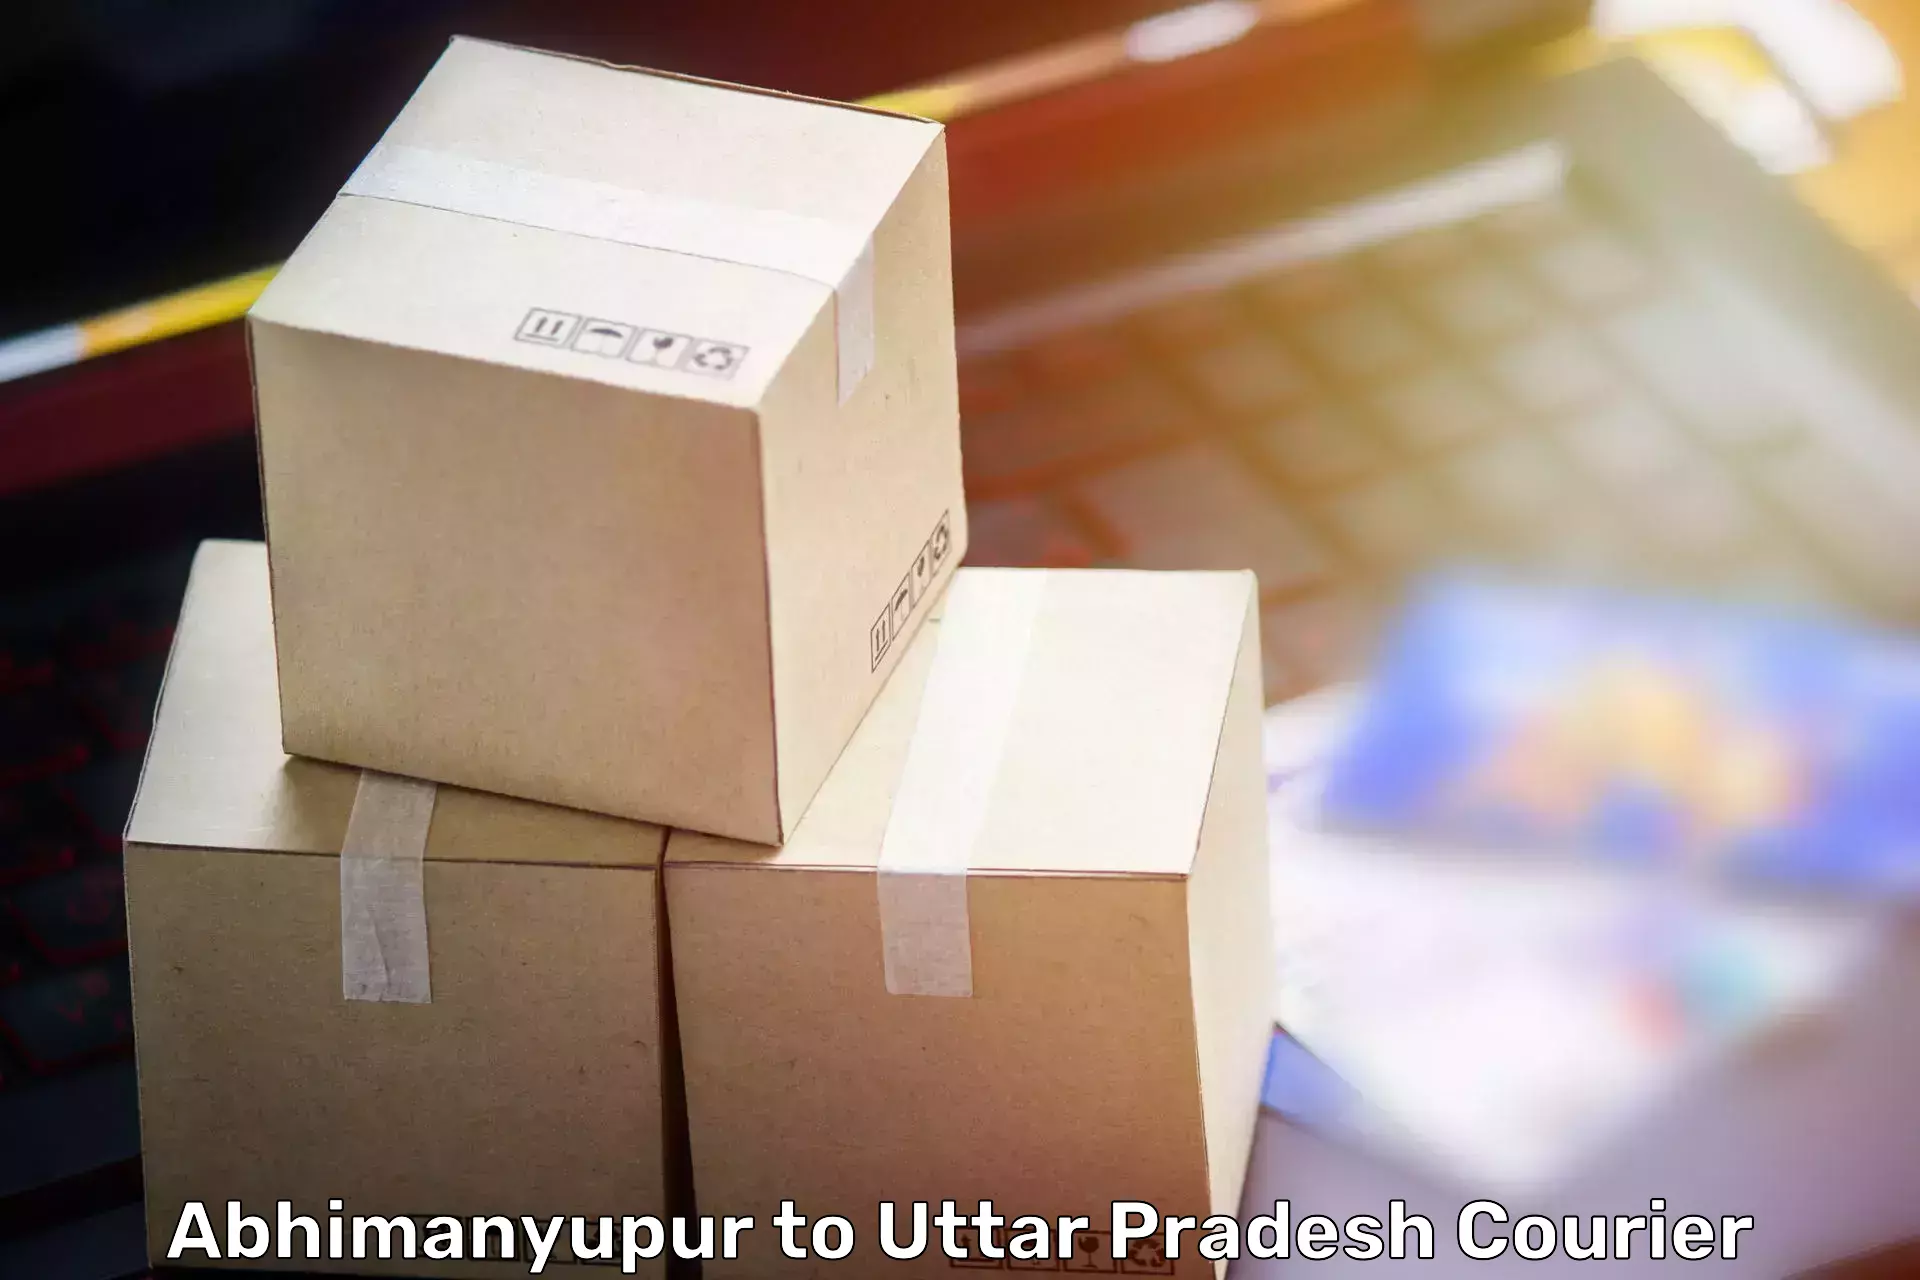 Budget-friendly movers Abhimanyupur to Agra